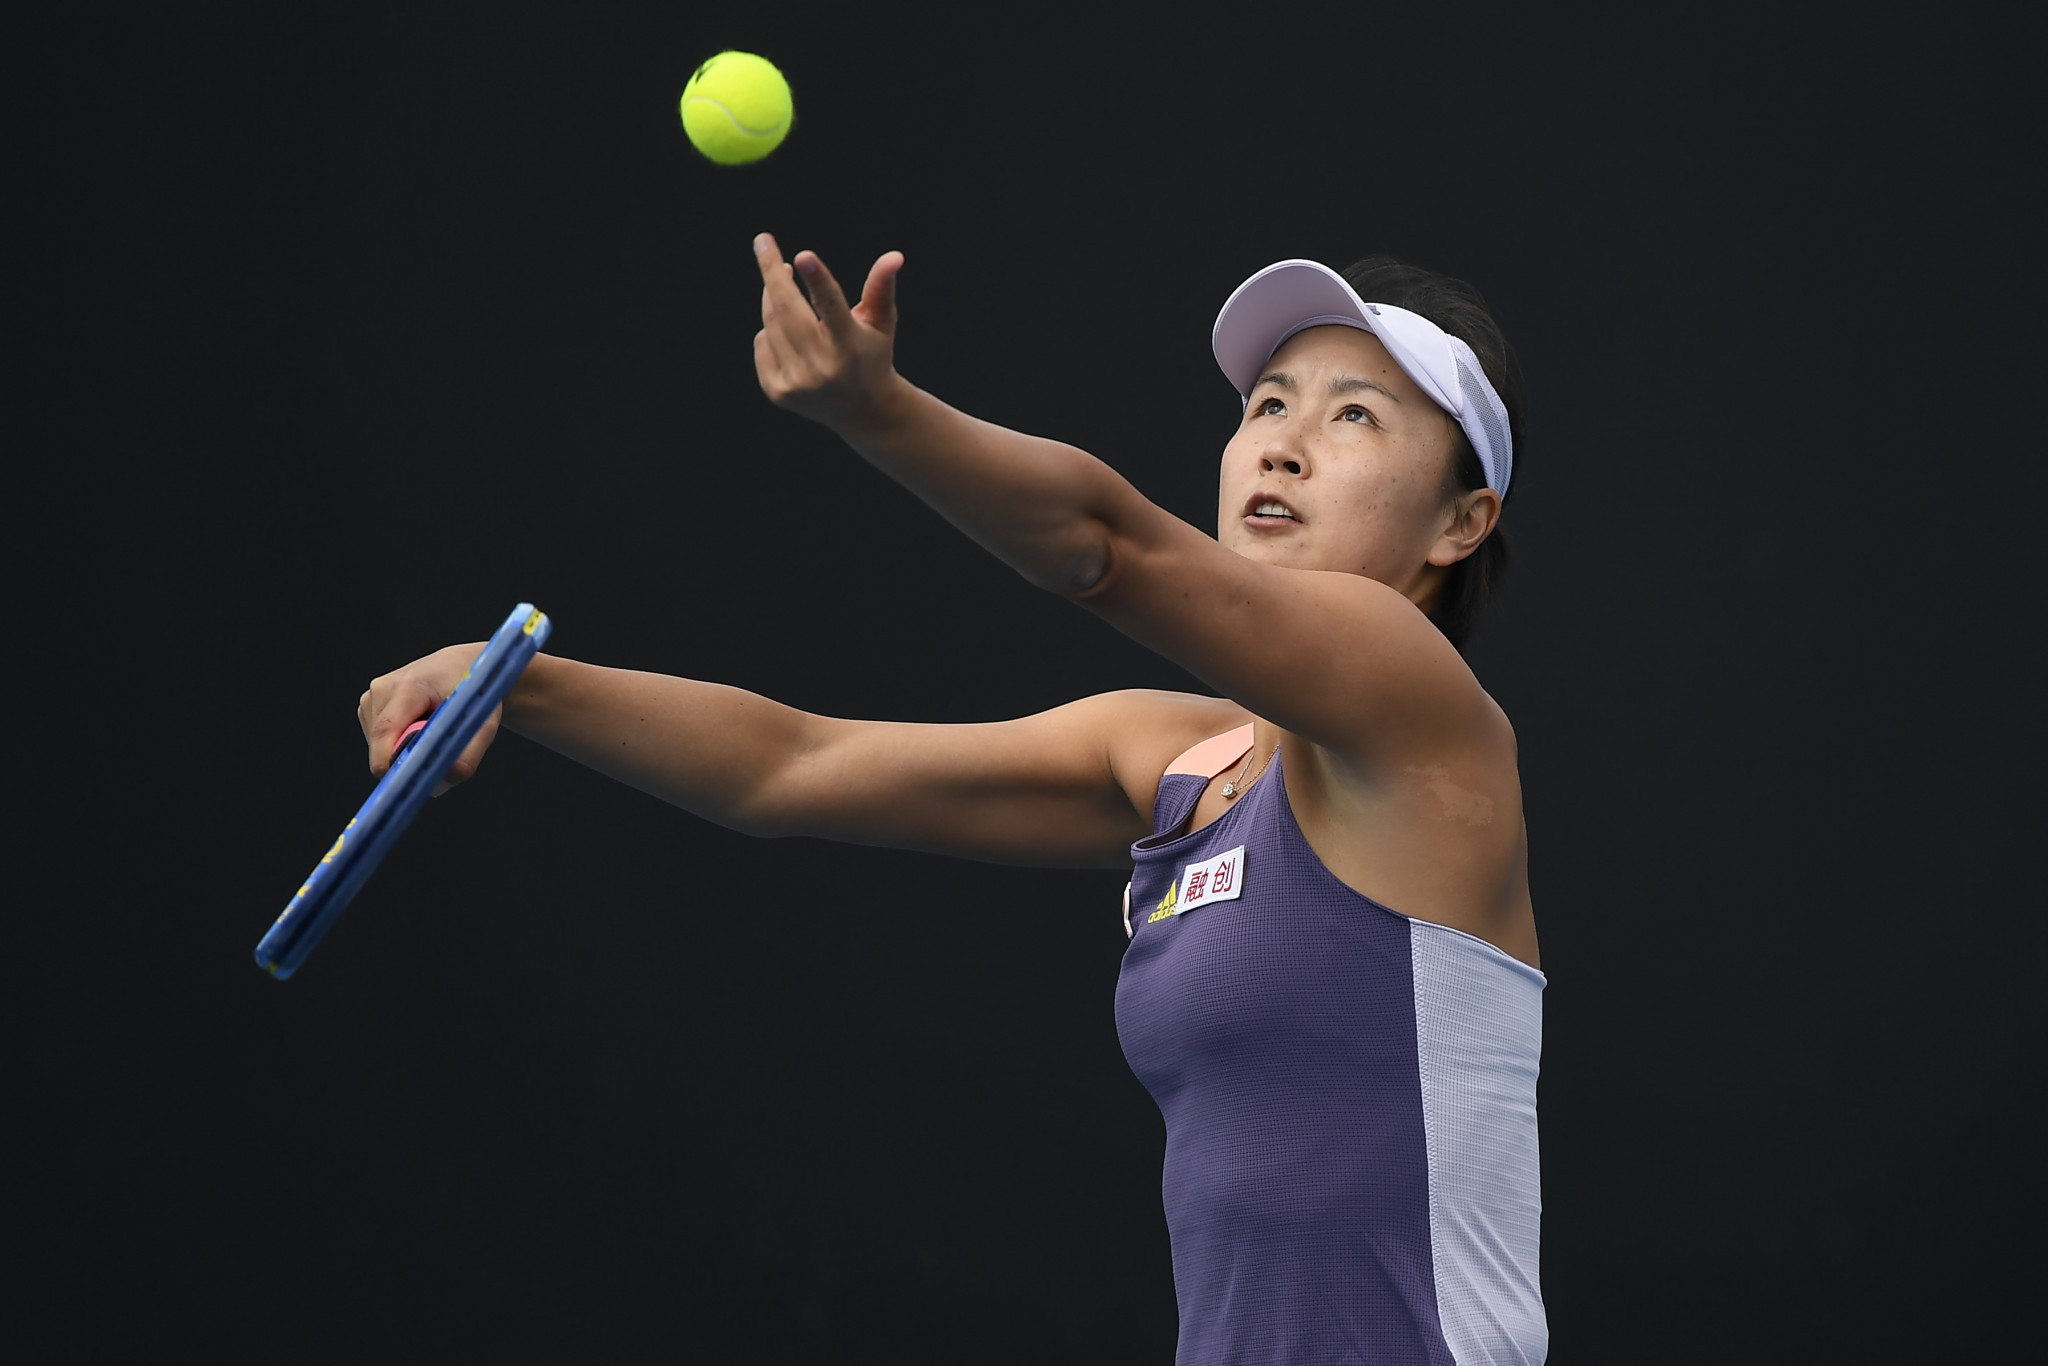 China has to stage four ATP events in 2022 despite ongoing concern over Peng Shuai's well-being ©Getty Images